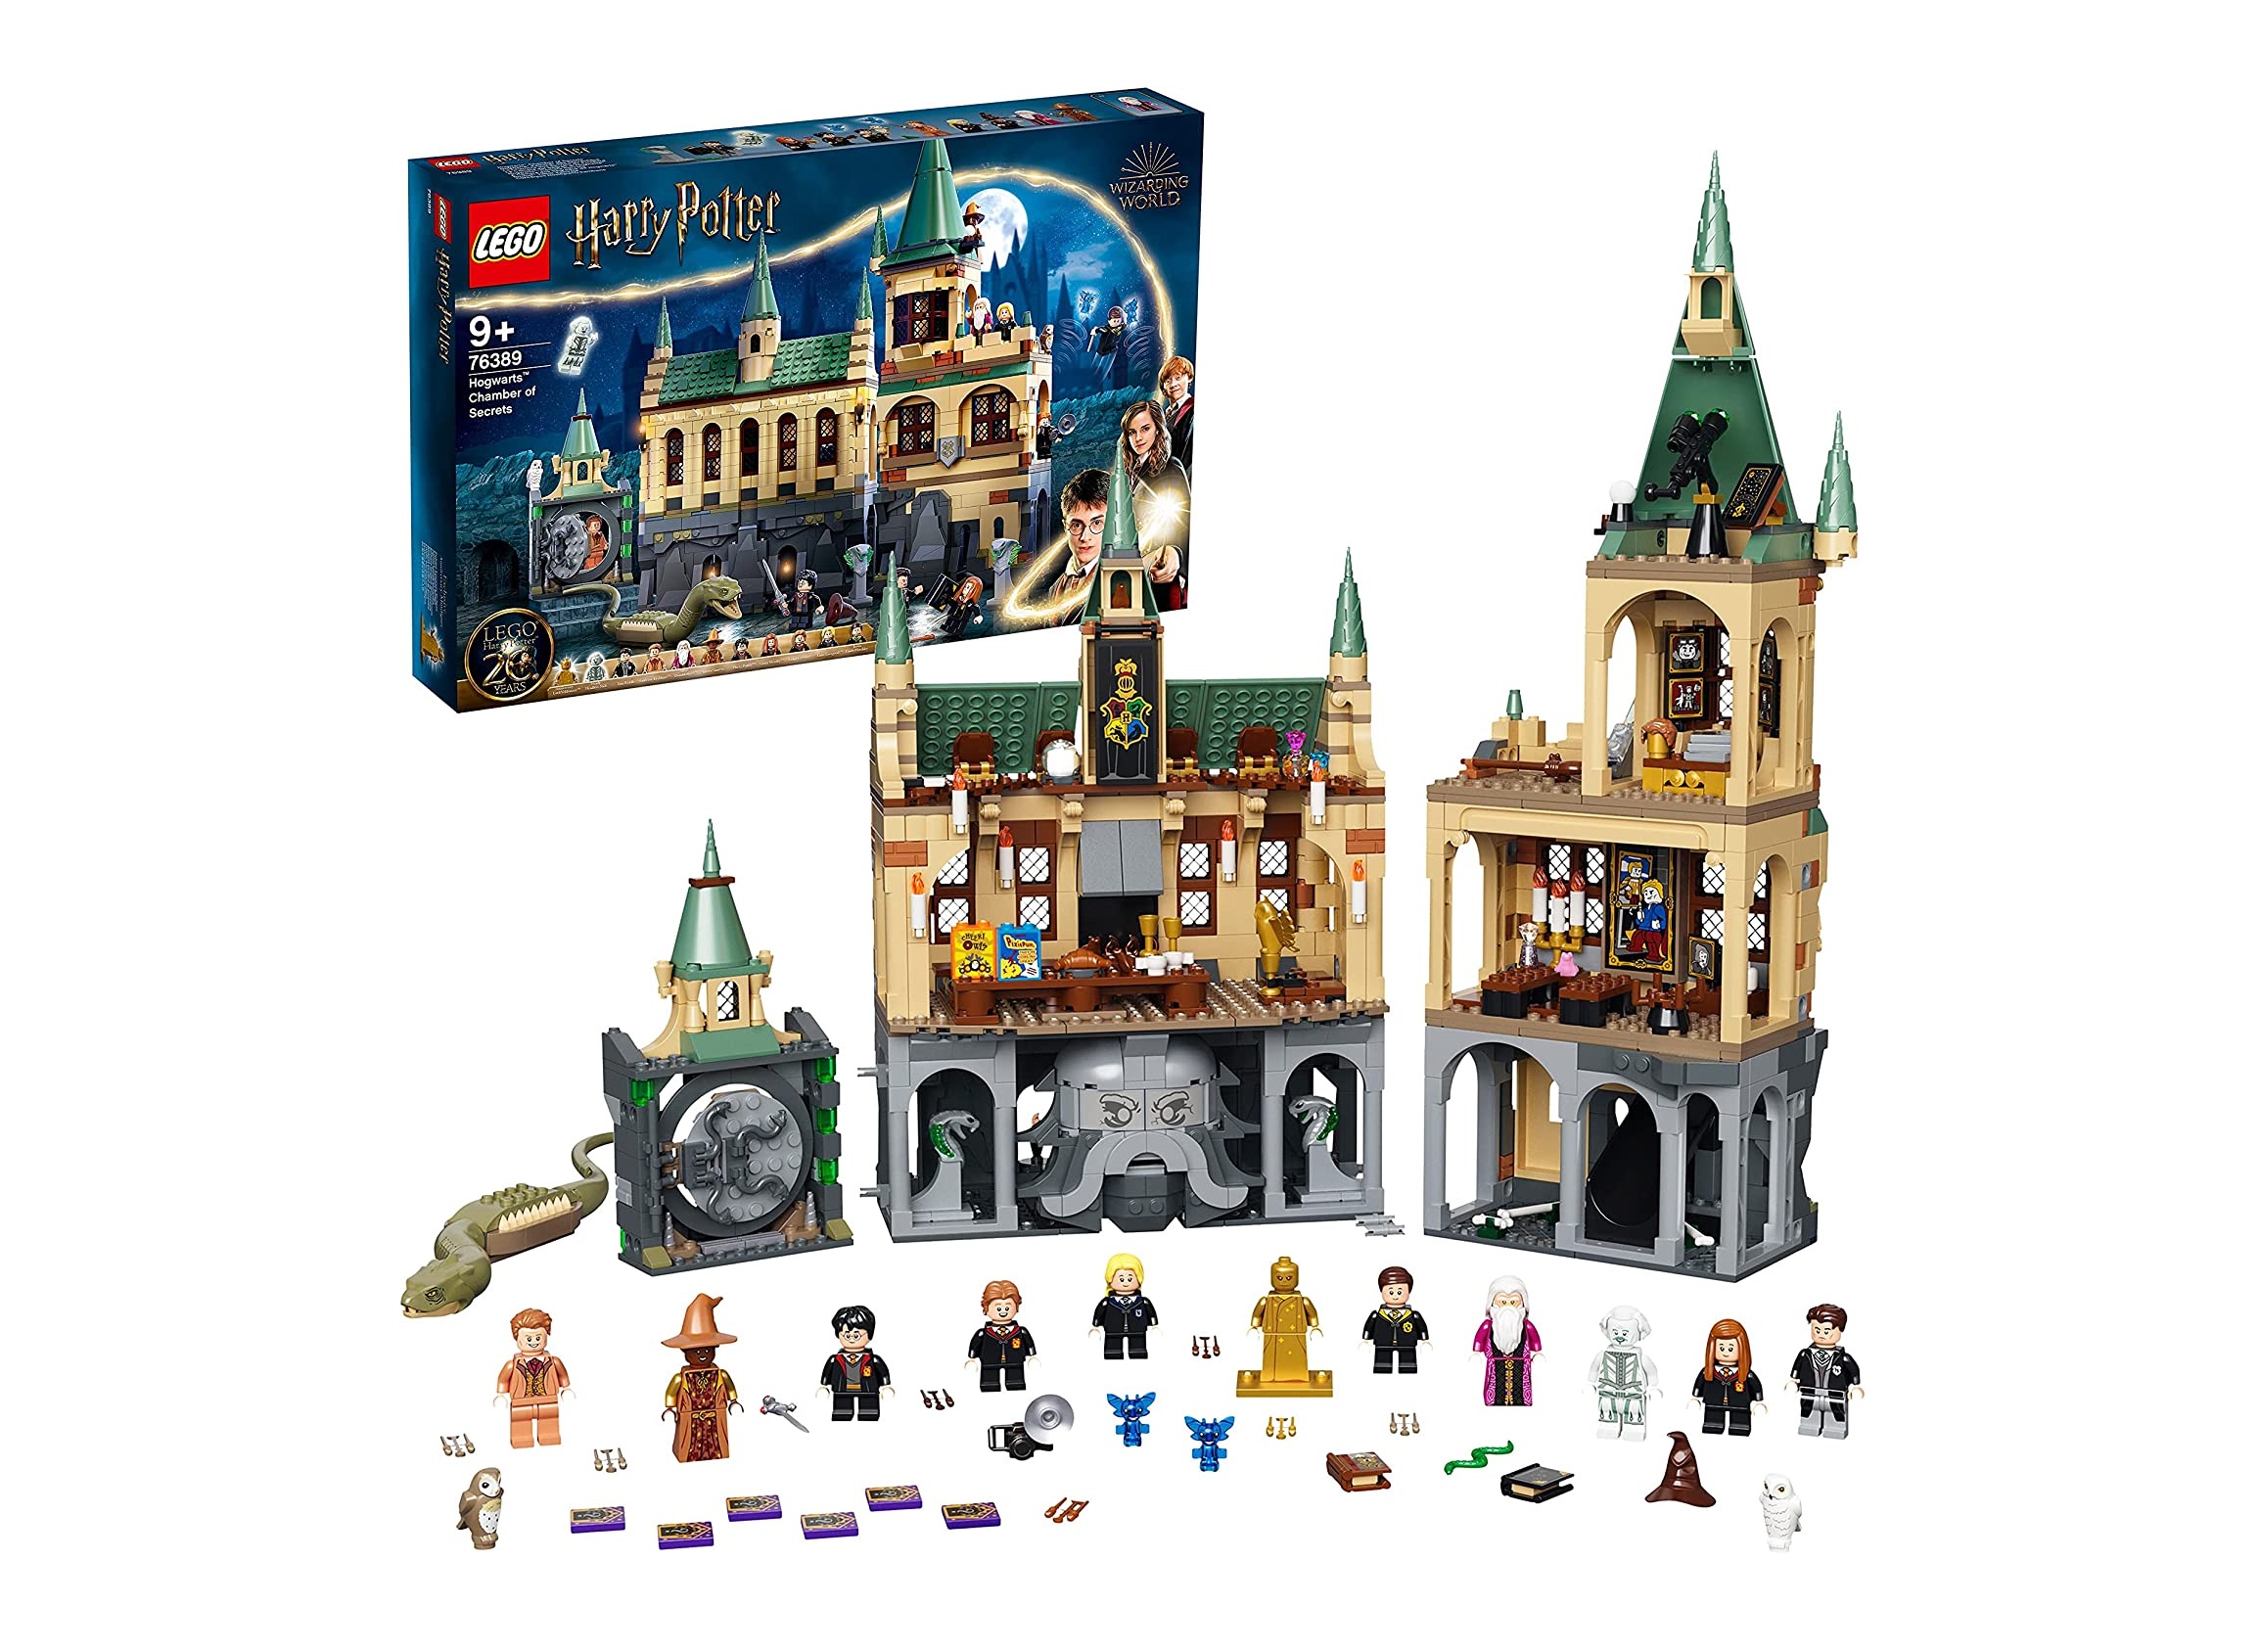 One of the highlights of this set is the gold Voldemort for the 20th anniversary of 'Harry Potter'.